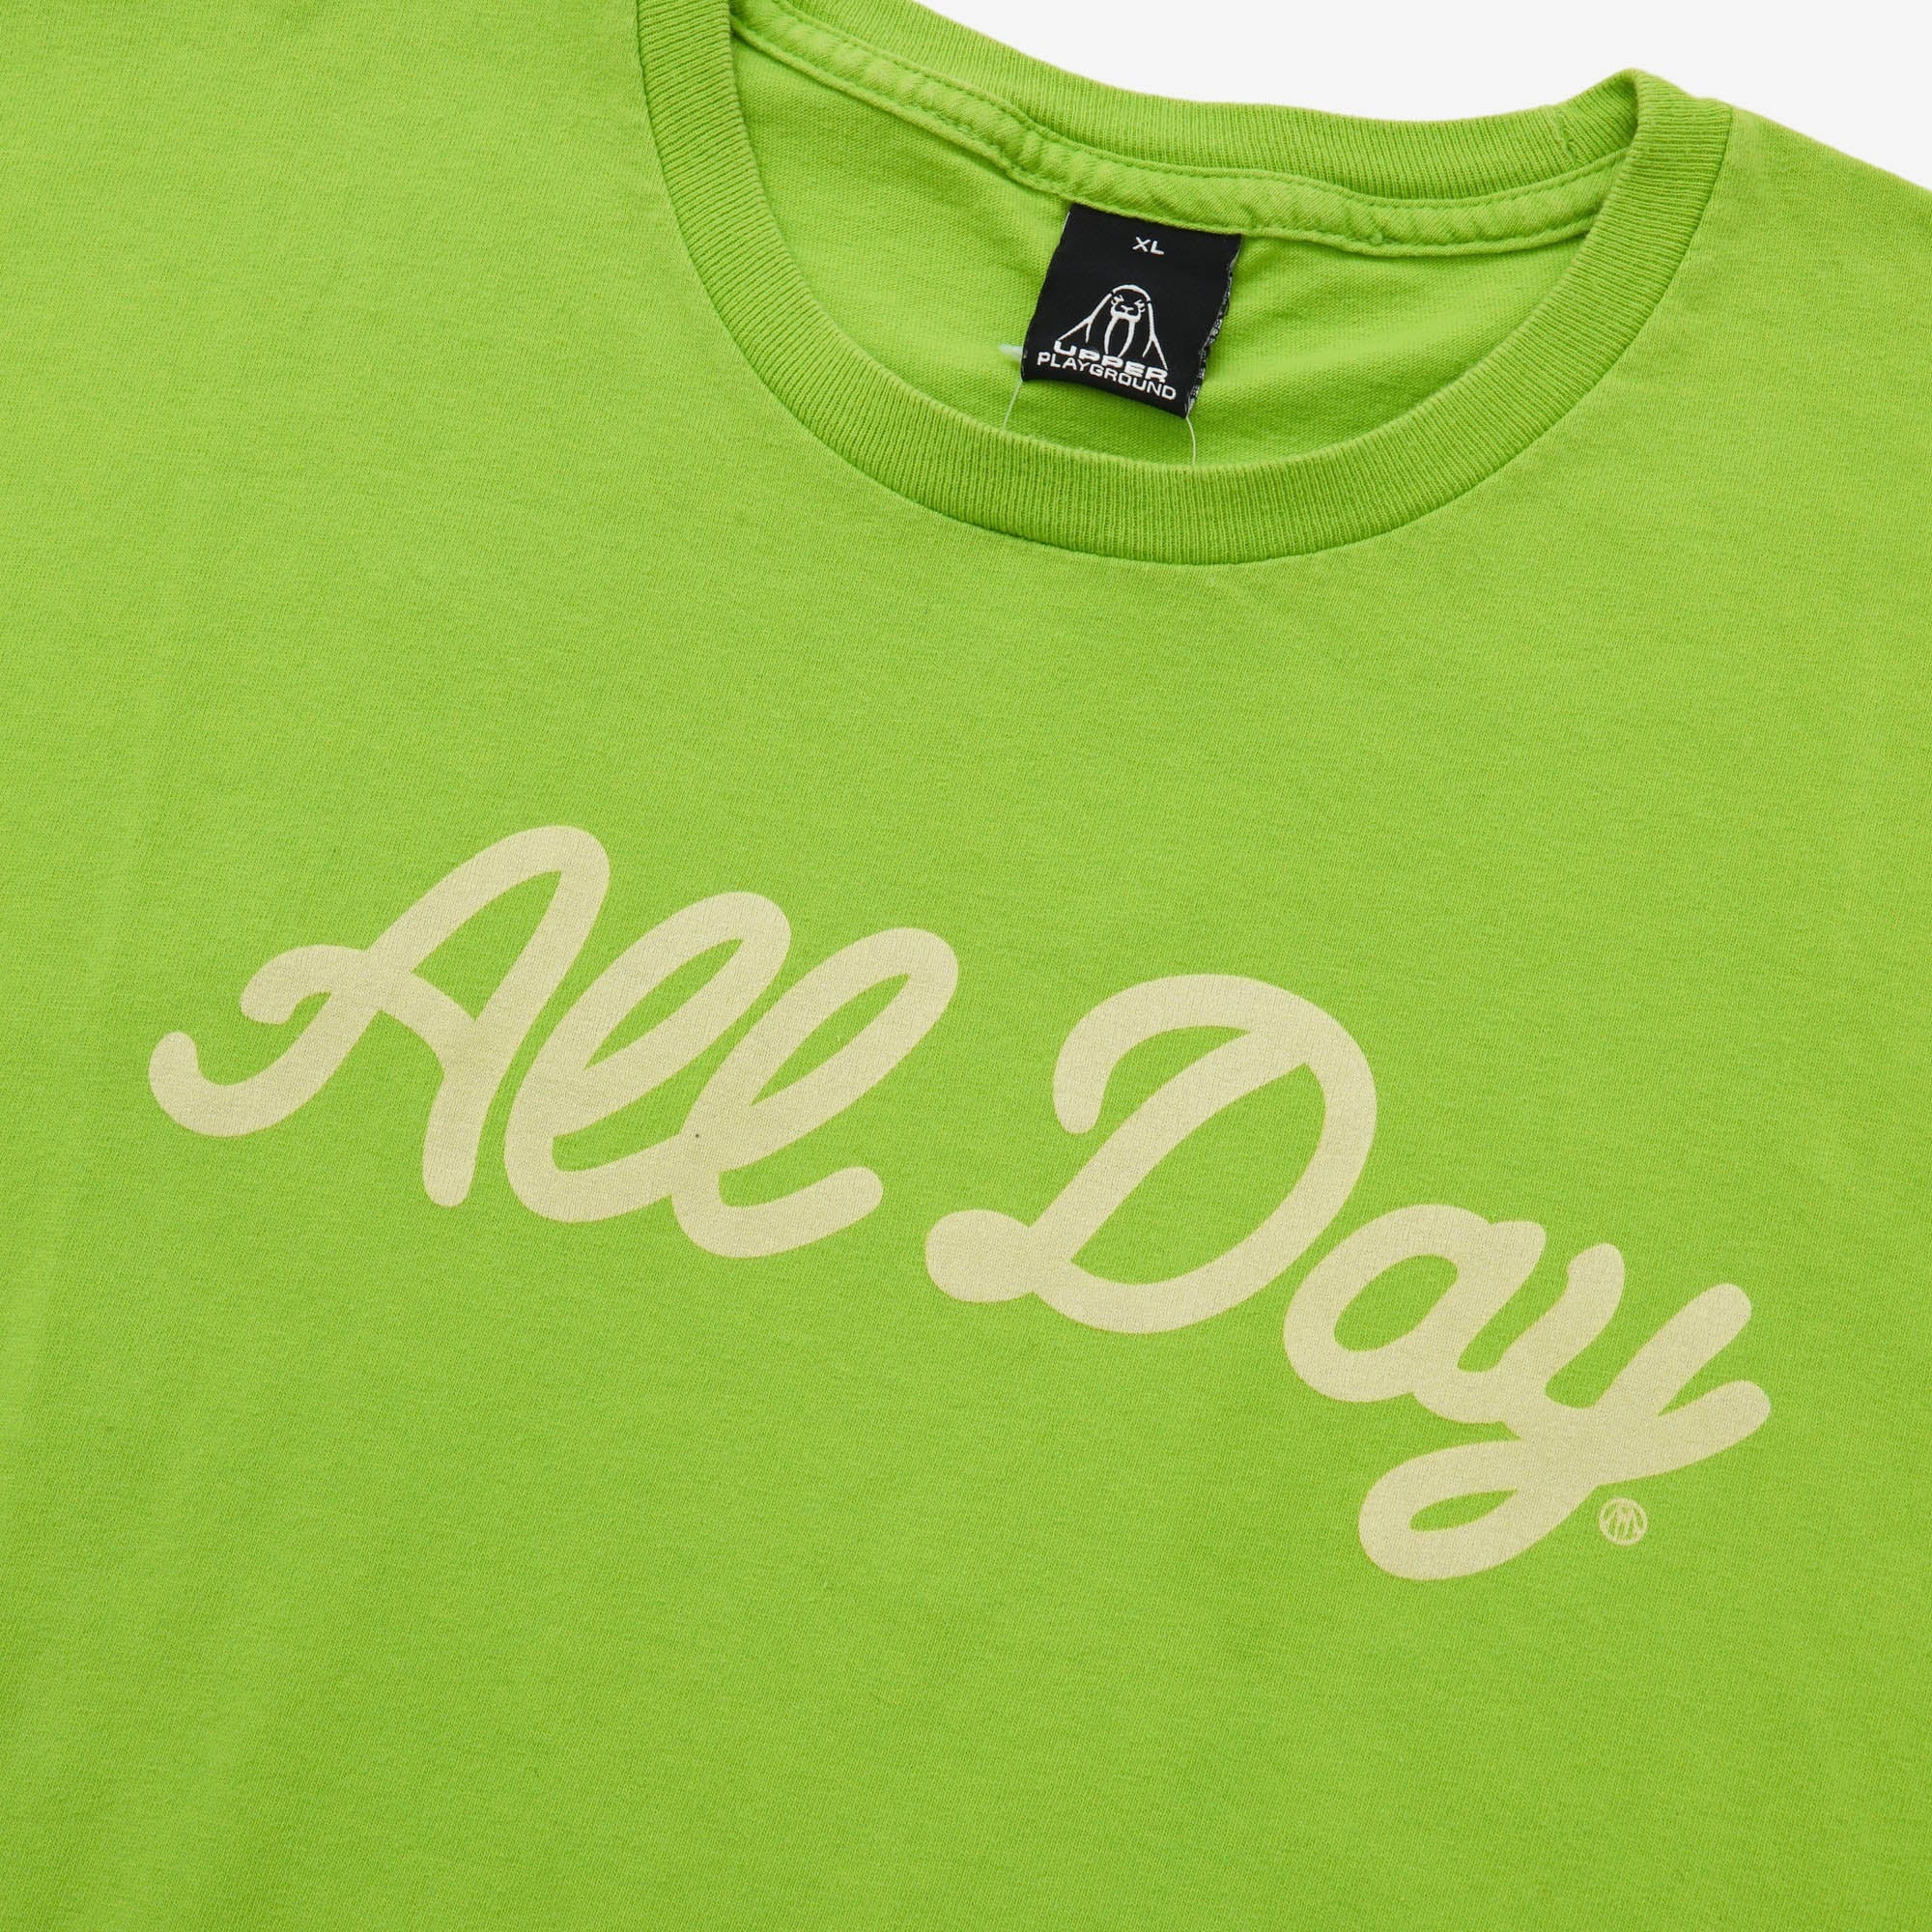 90s Vintage All Day Tee